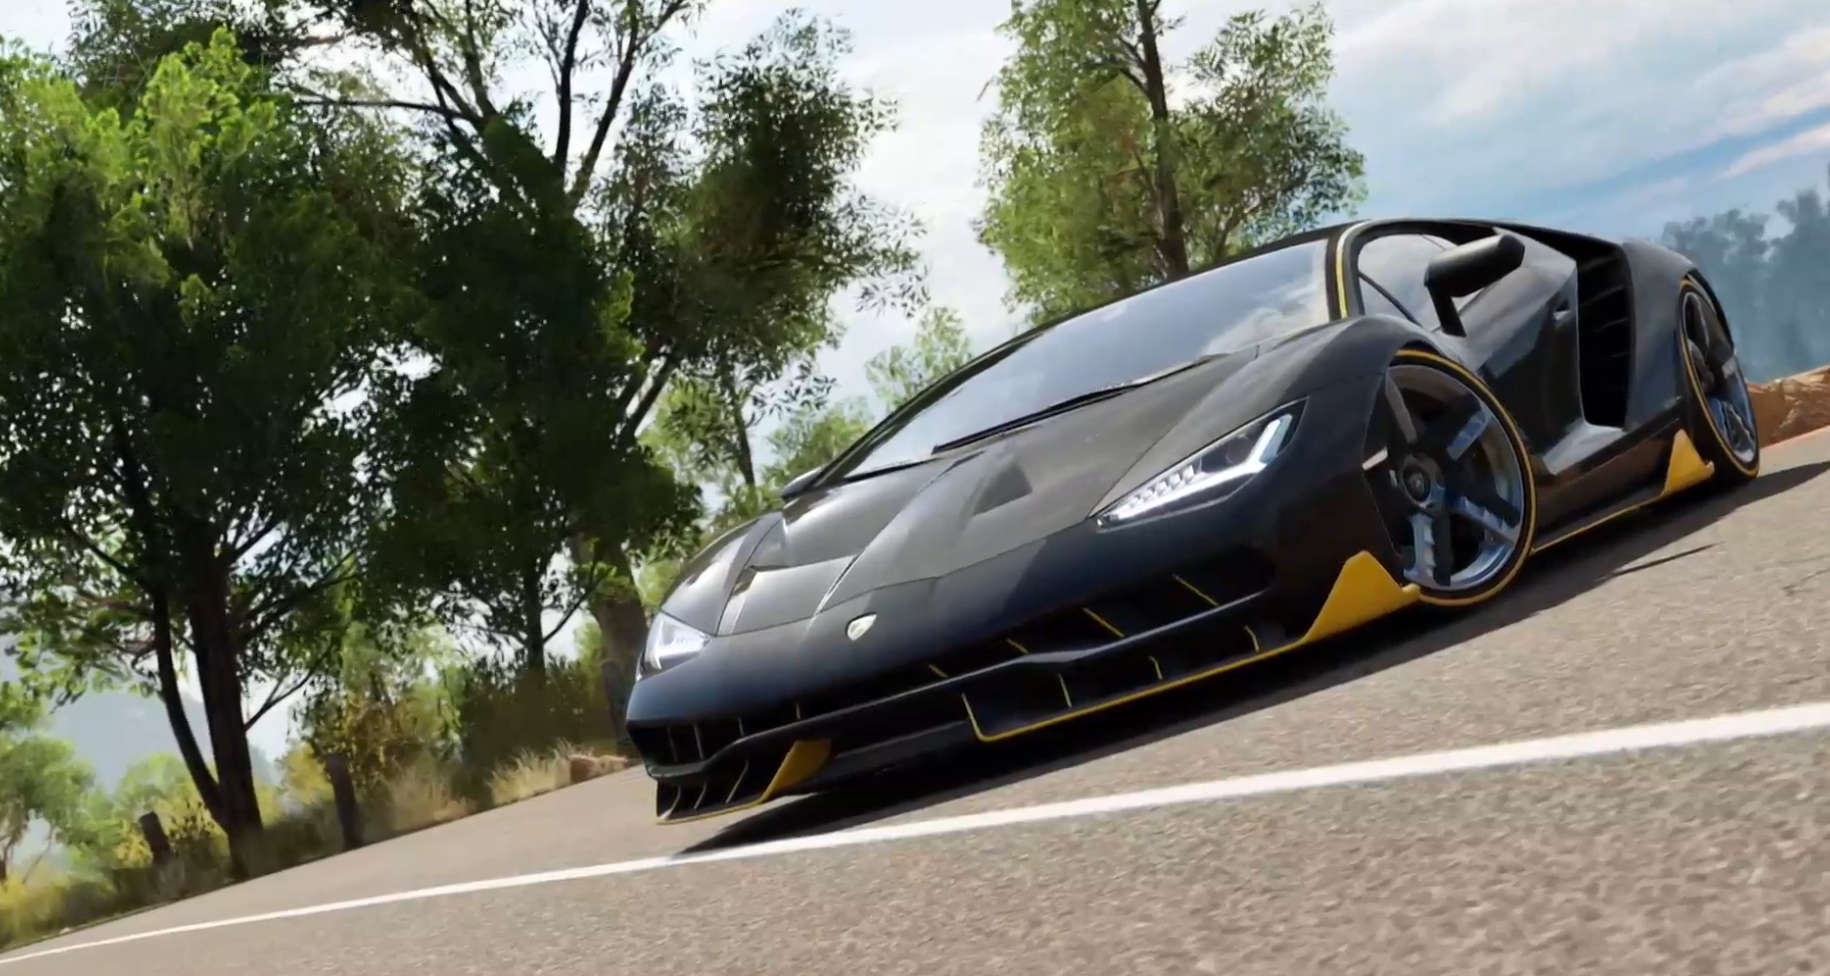 Forza Horizon 3 System Requirements: Check the Complete Forza Horizon 3  System Requirements Here - News